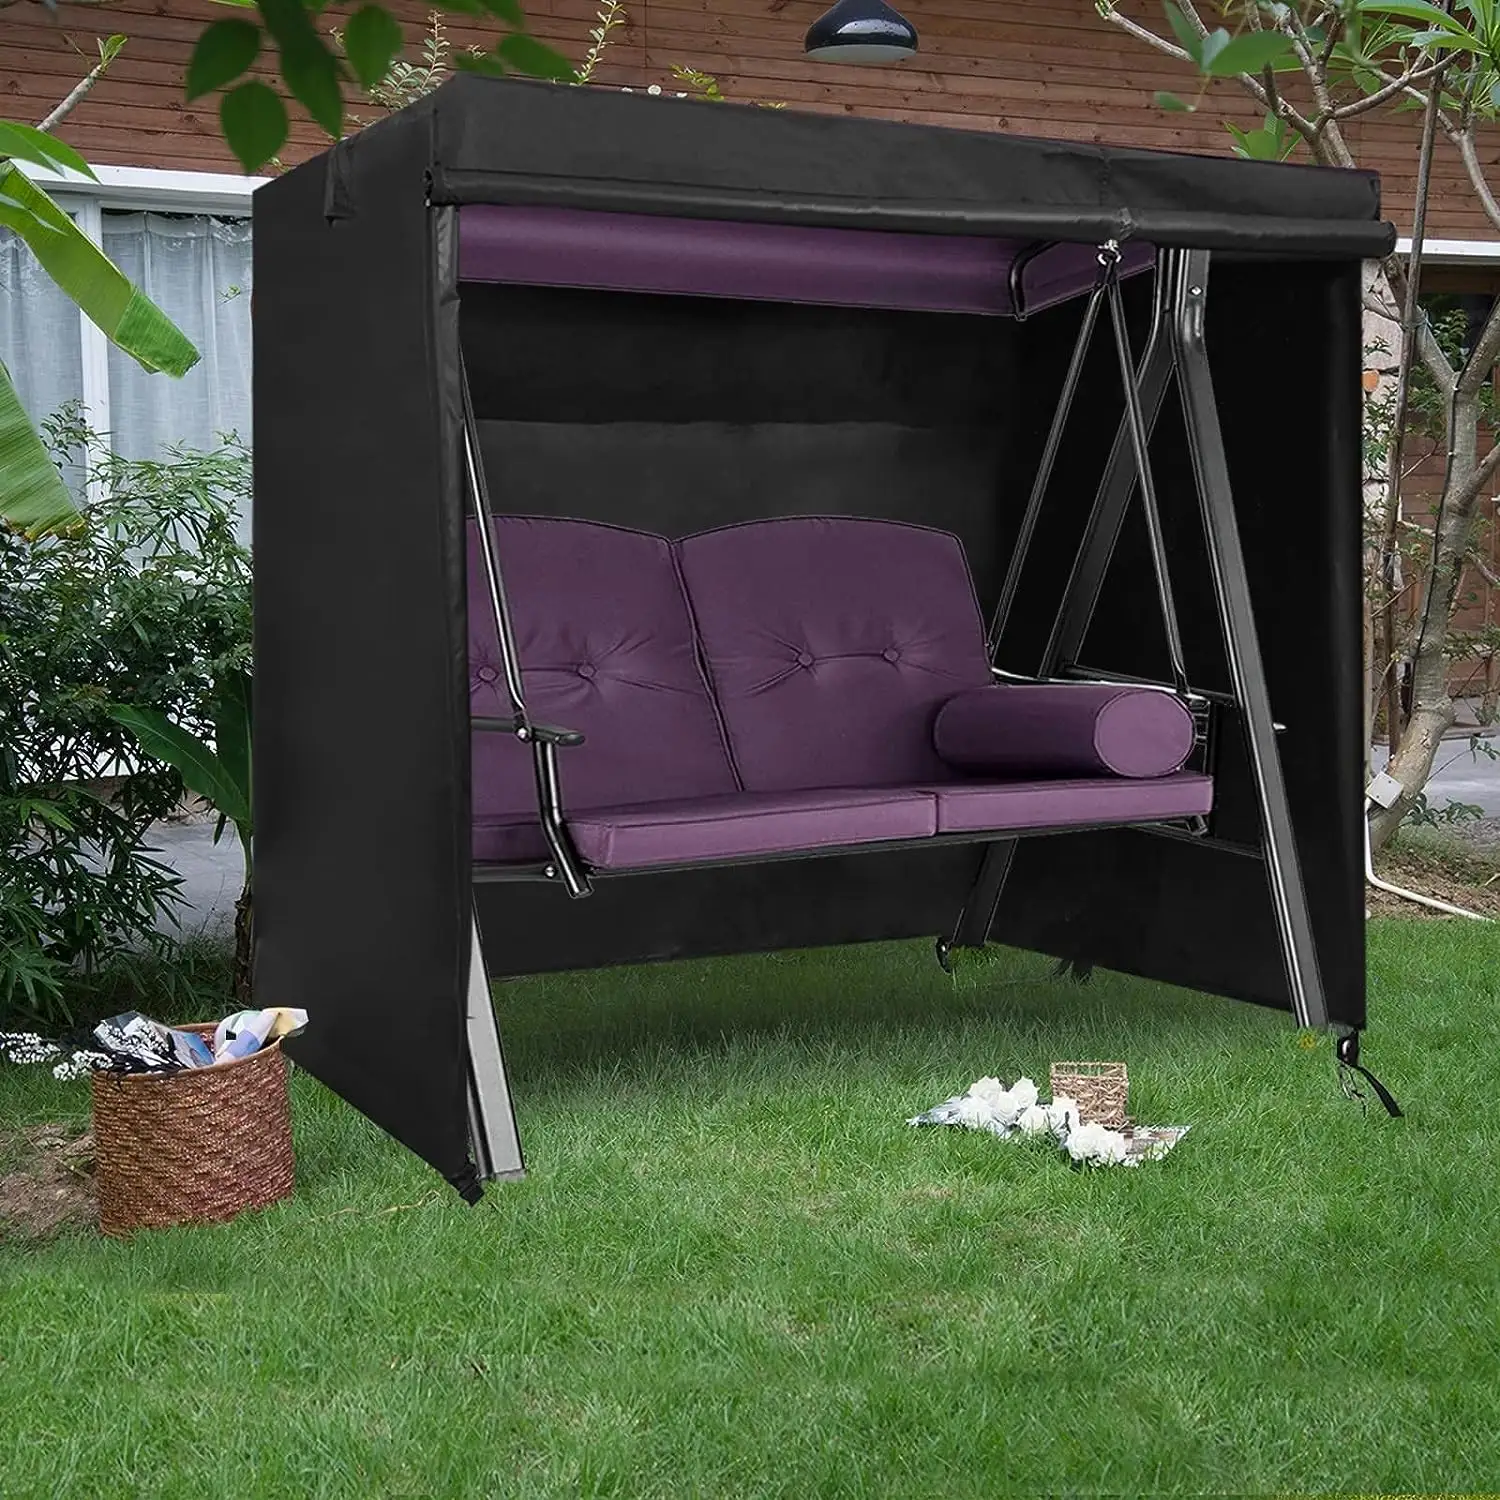 Outdoor swing three seater hammock cover garden waterproof glider chair cover UV resistant top cover black